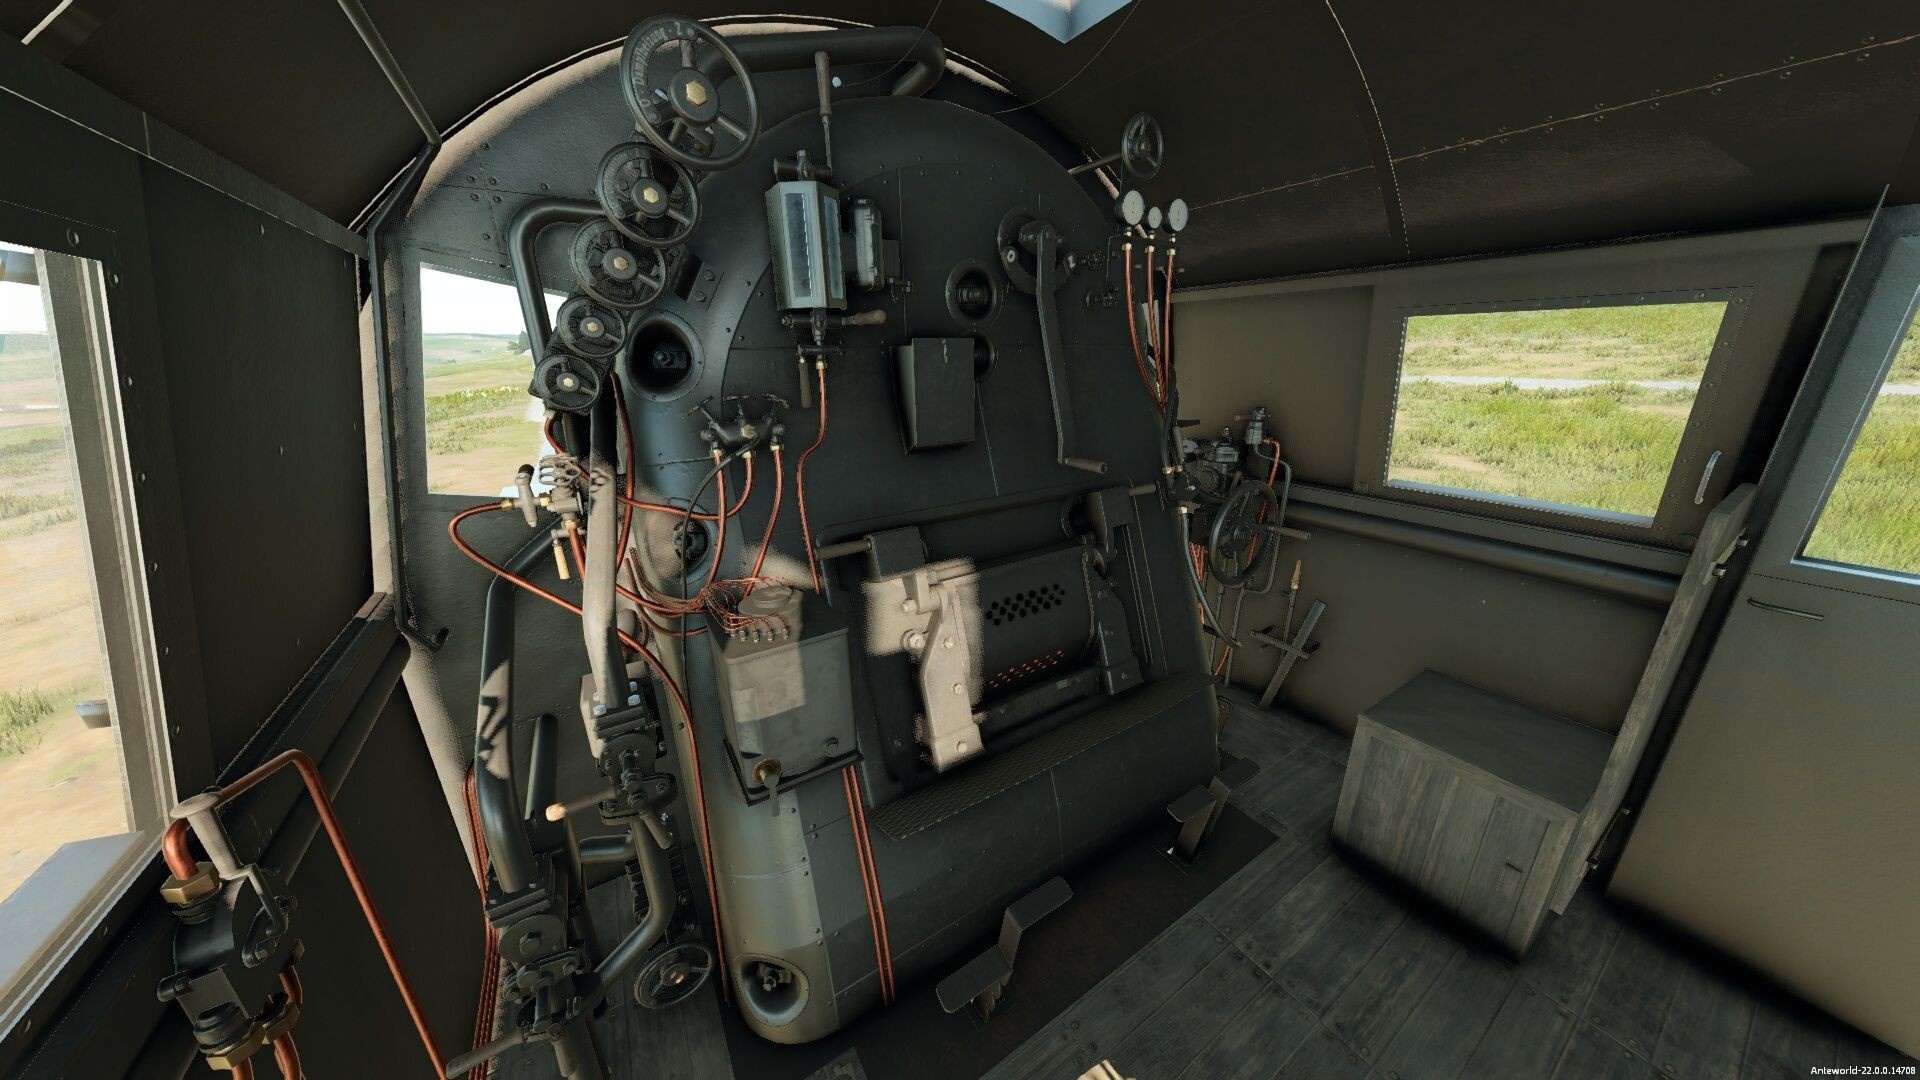 (This steamlock (cockpit) looks pretty good how realistically it works remains to be seen. Players'' own creations can be shared via the Steam Workshop. Since the developer tools in the trailer look quite complex, it seems that realistic vehicles are possible with them)